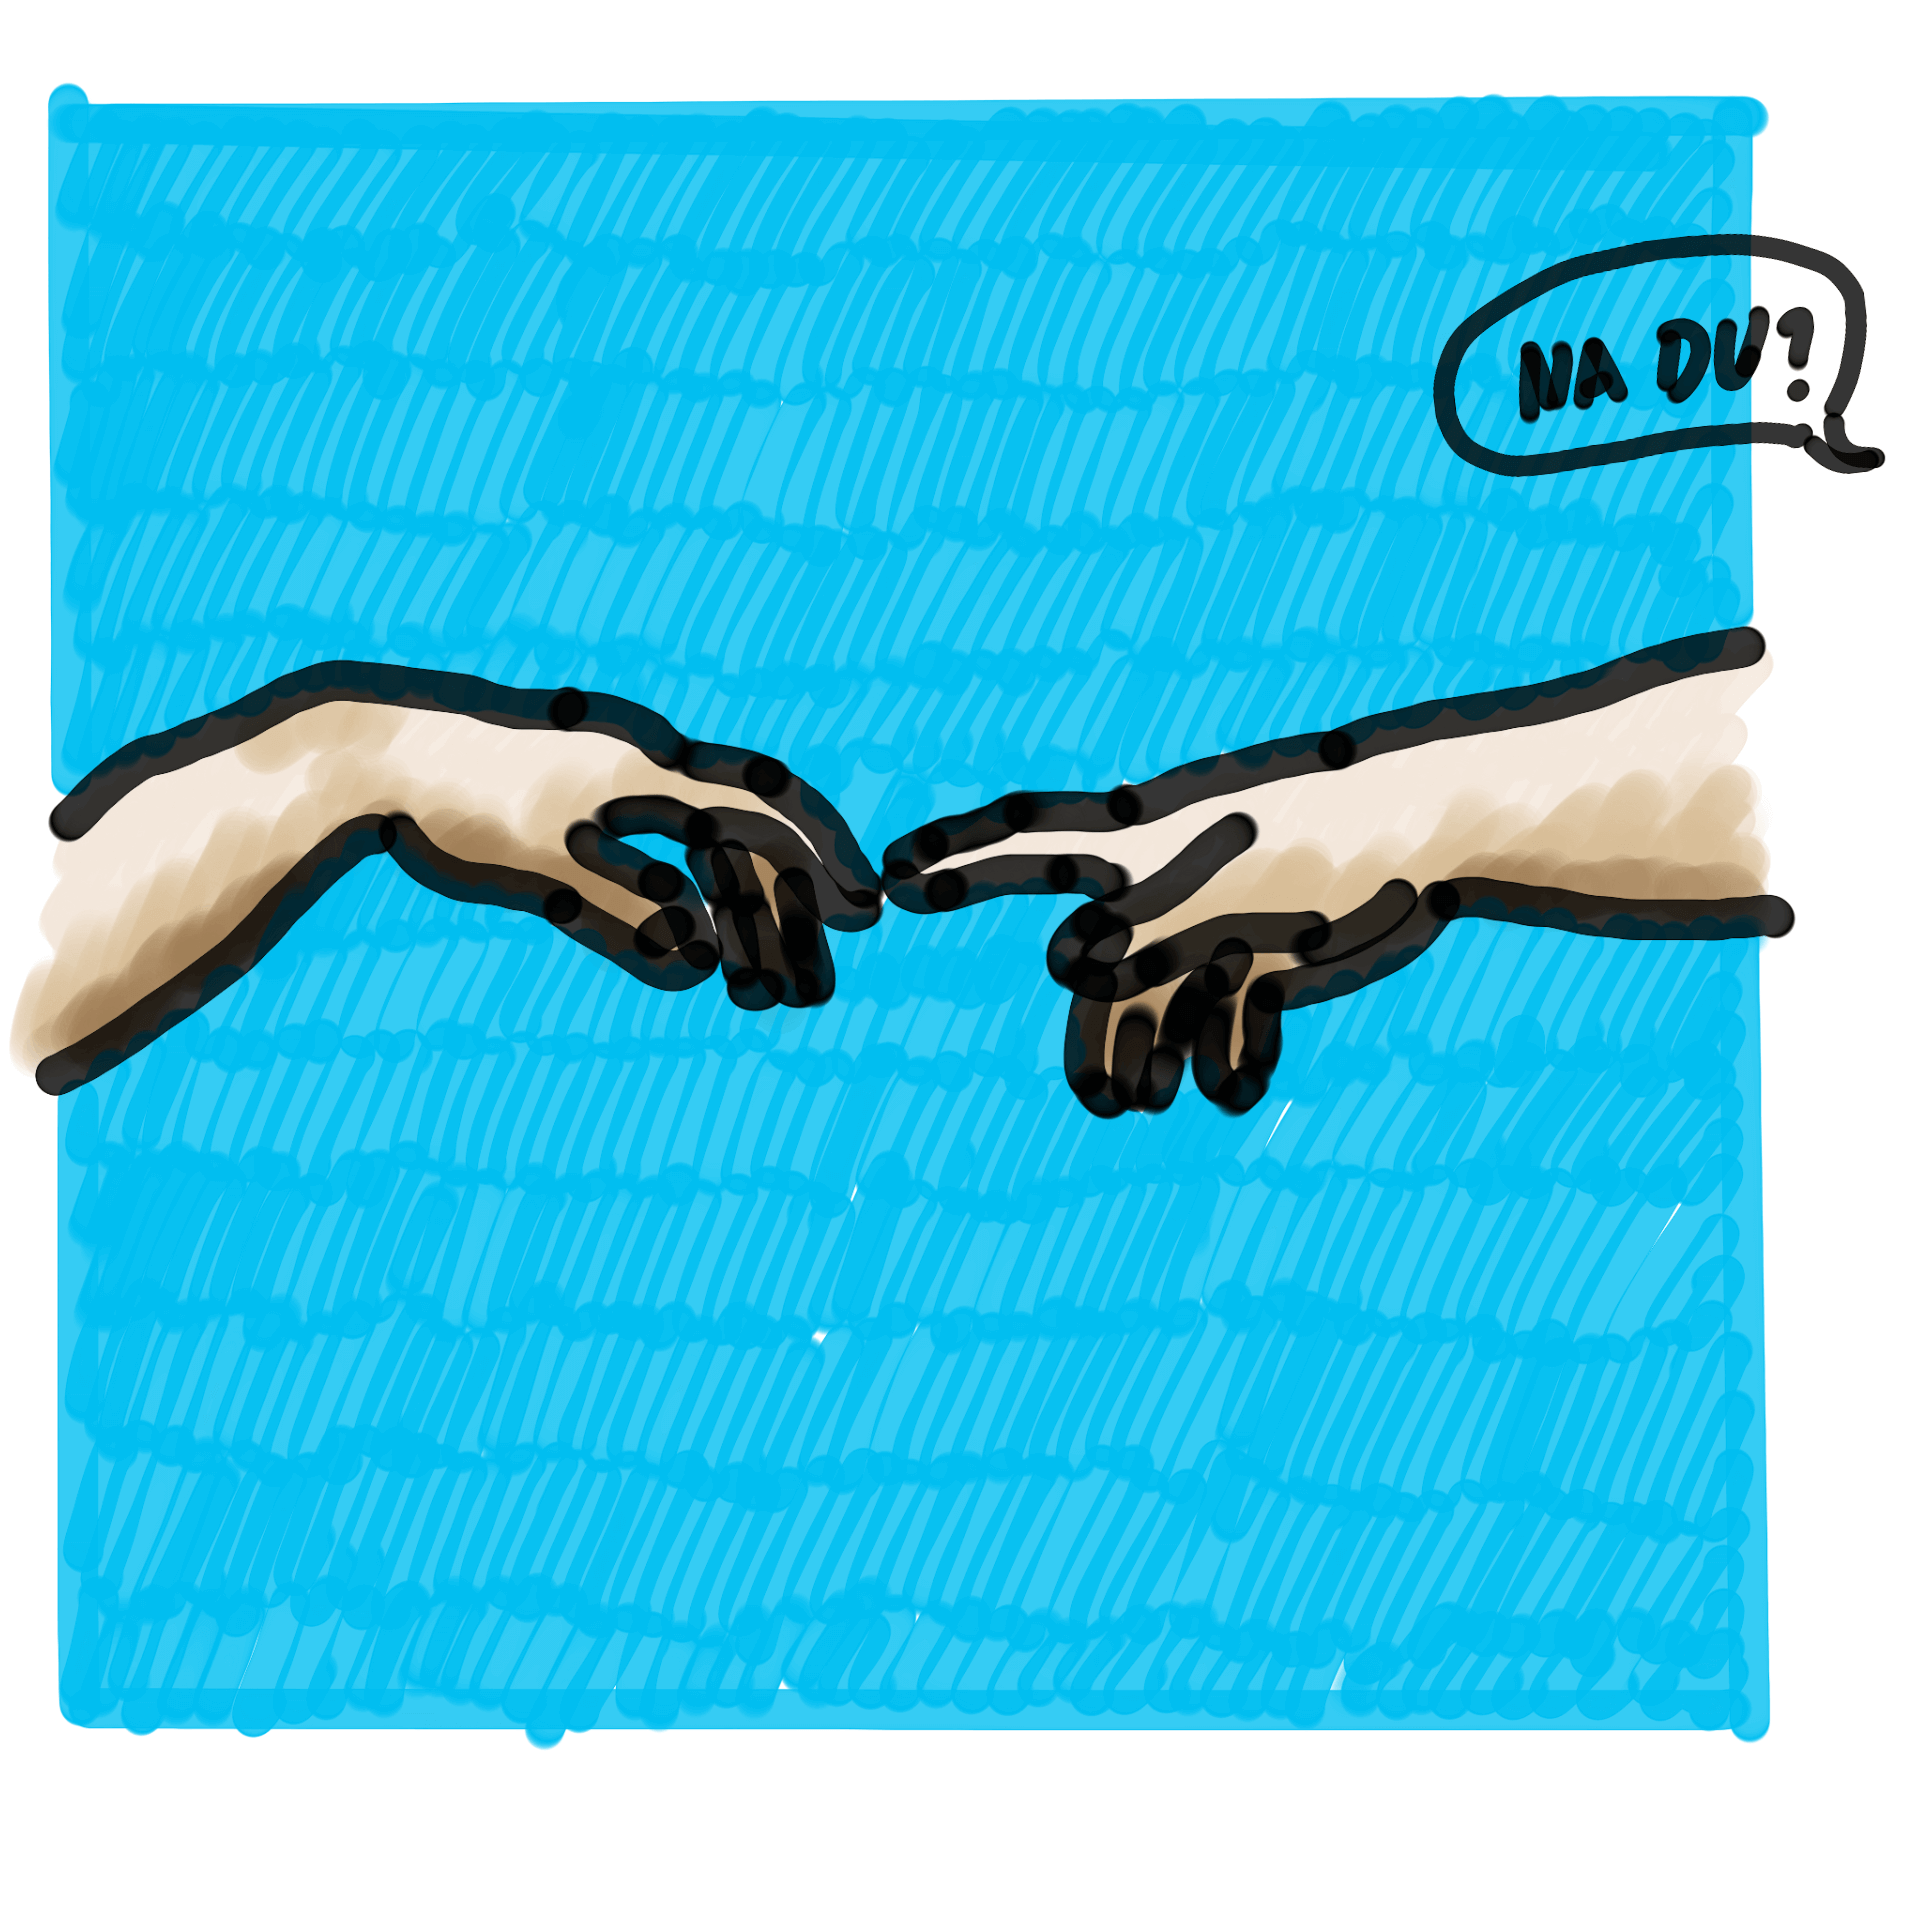 Hand-drawn hands reaching out to each other, similar to Michelangelo's fresco "The Creation of Adam" and a speech bubble with "Na du?" at the upper right edge of the image